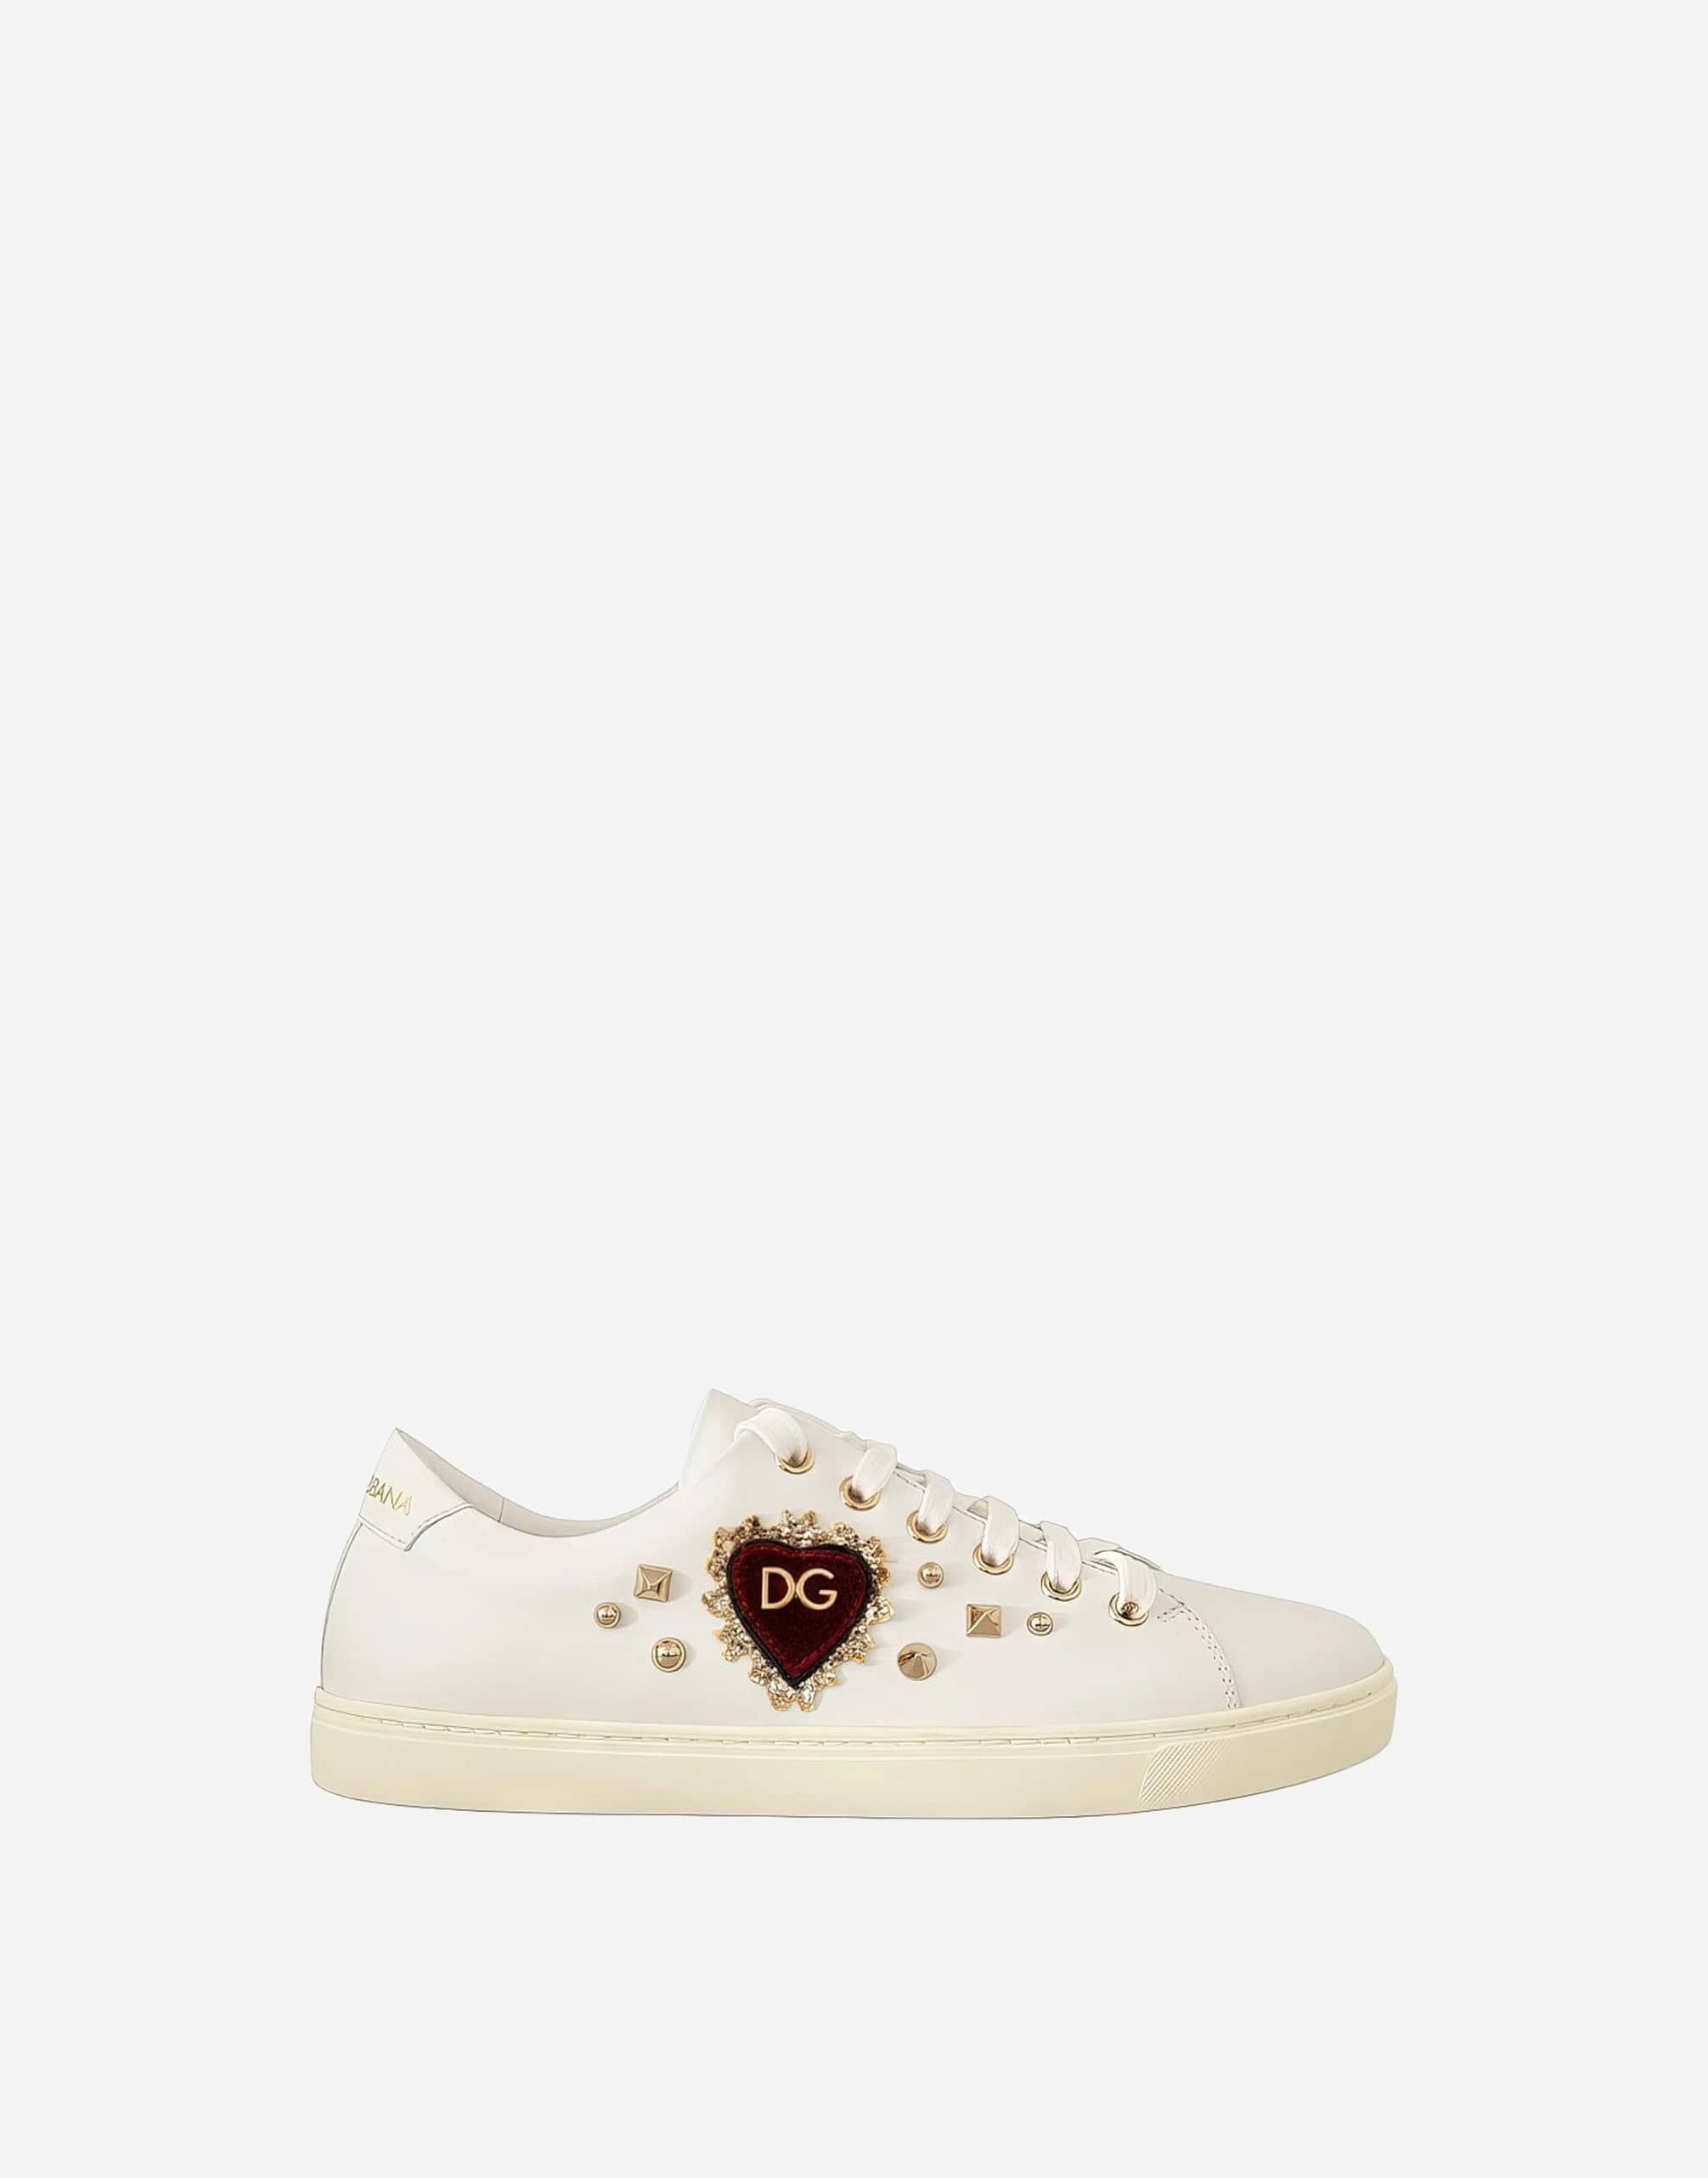 Dolce & Gabbana Sacred Heart Embroidered Embellished Sneakers